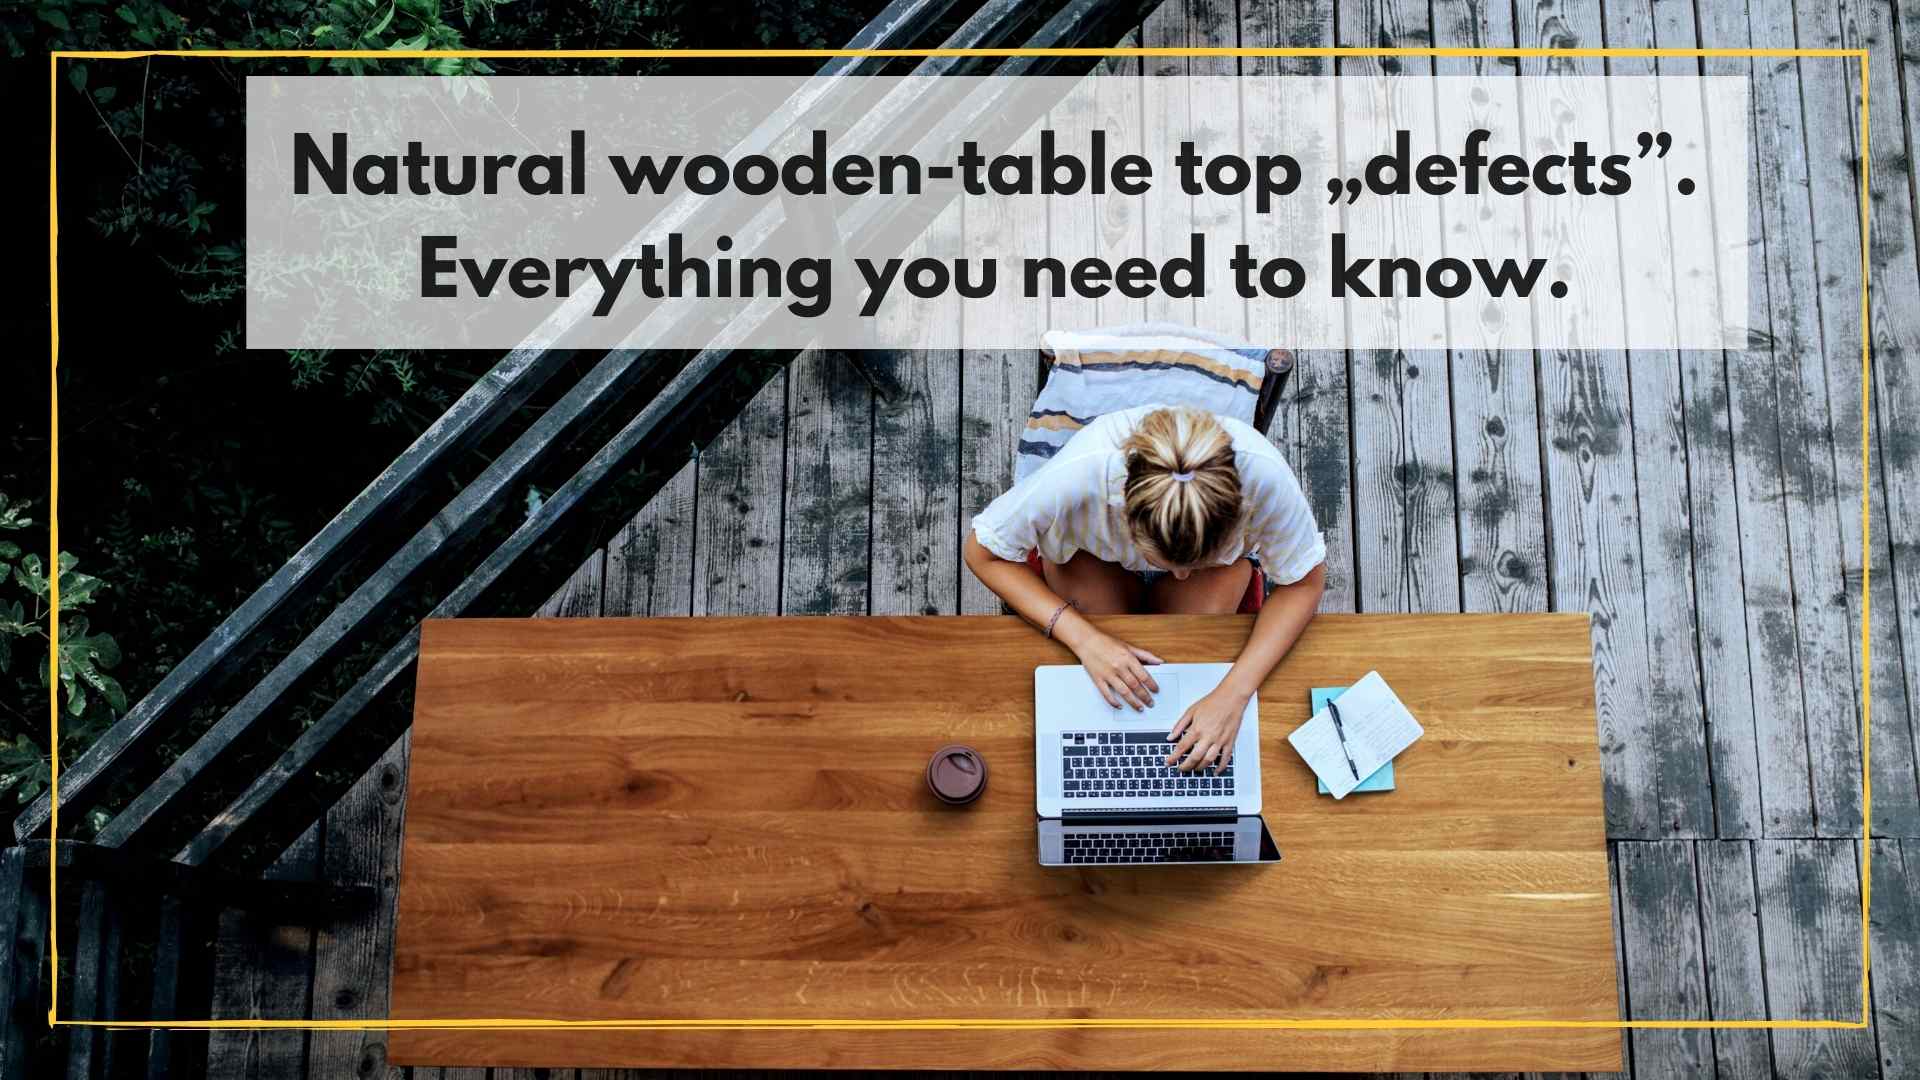 Natural wooden-table top „defects”. Everything you need to know. (2)